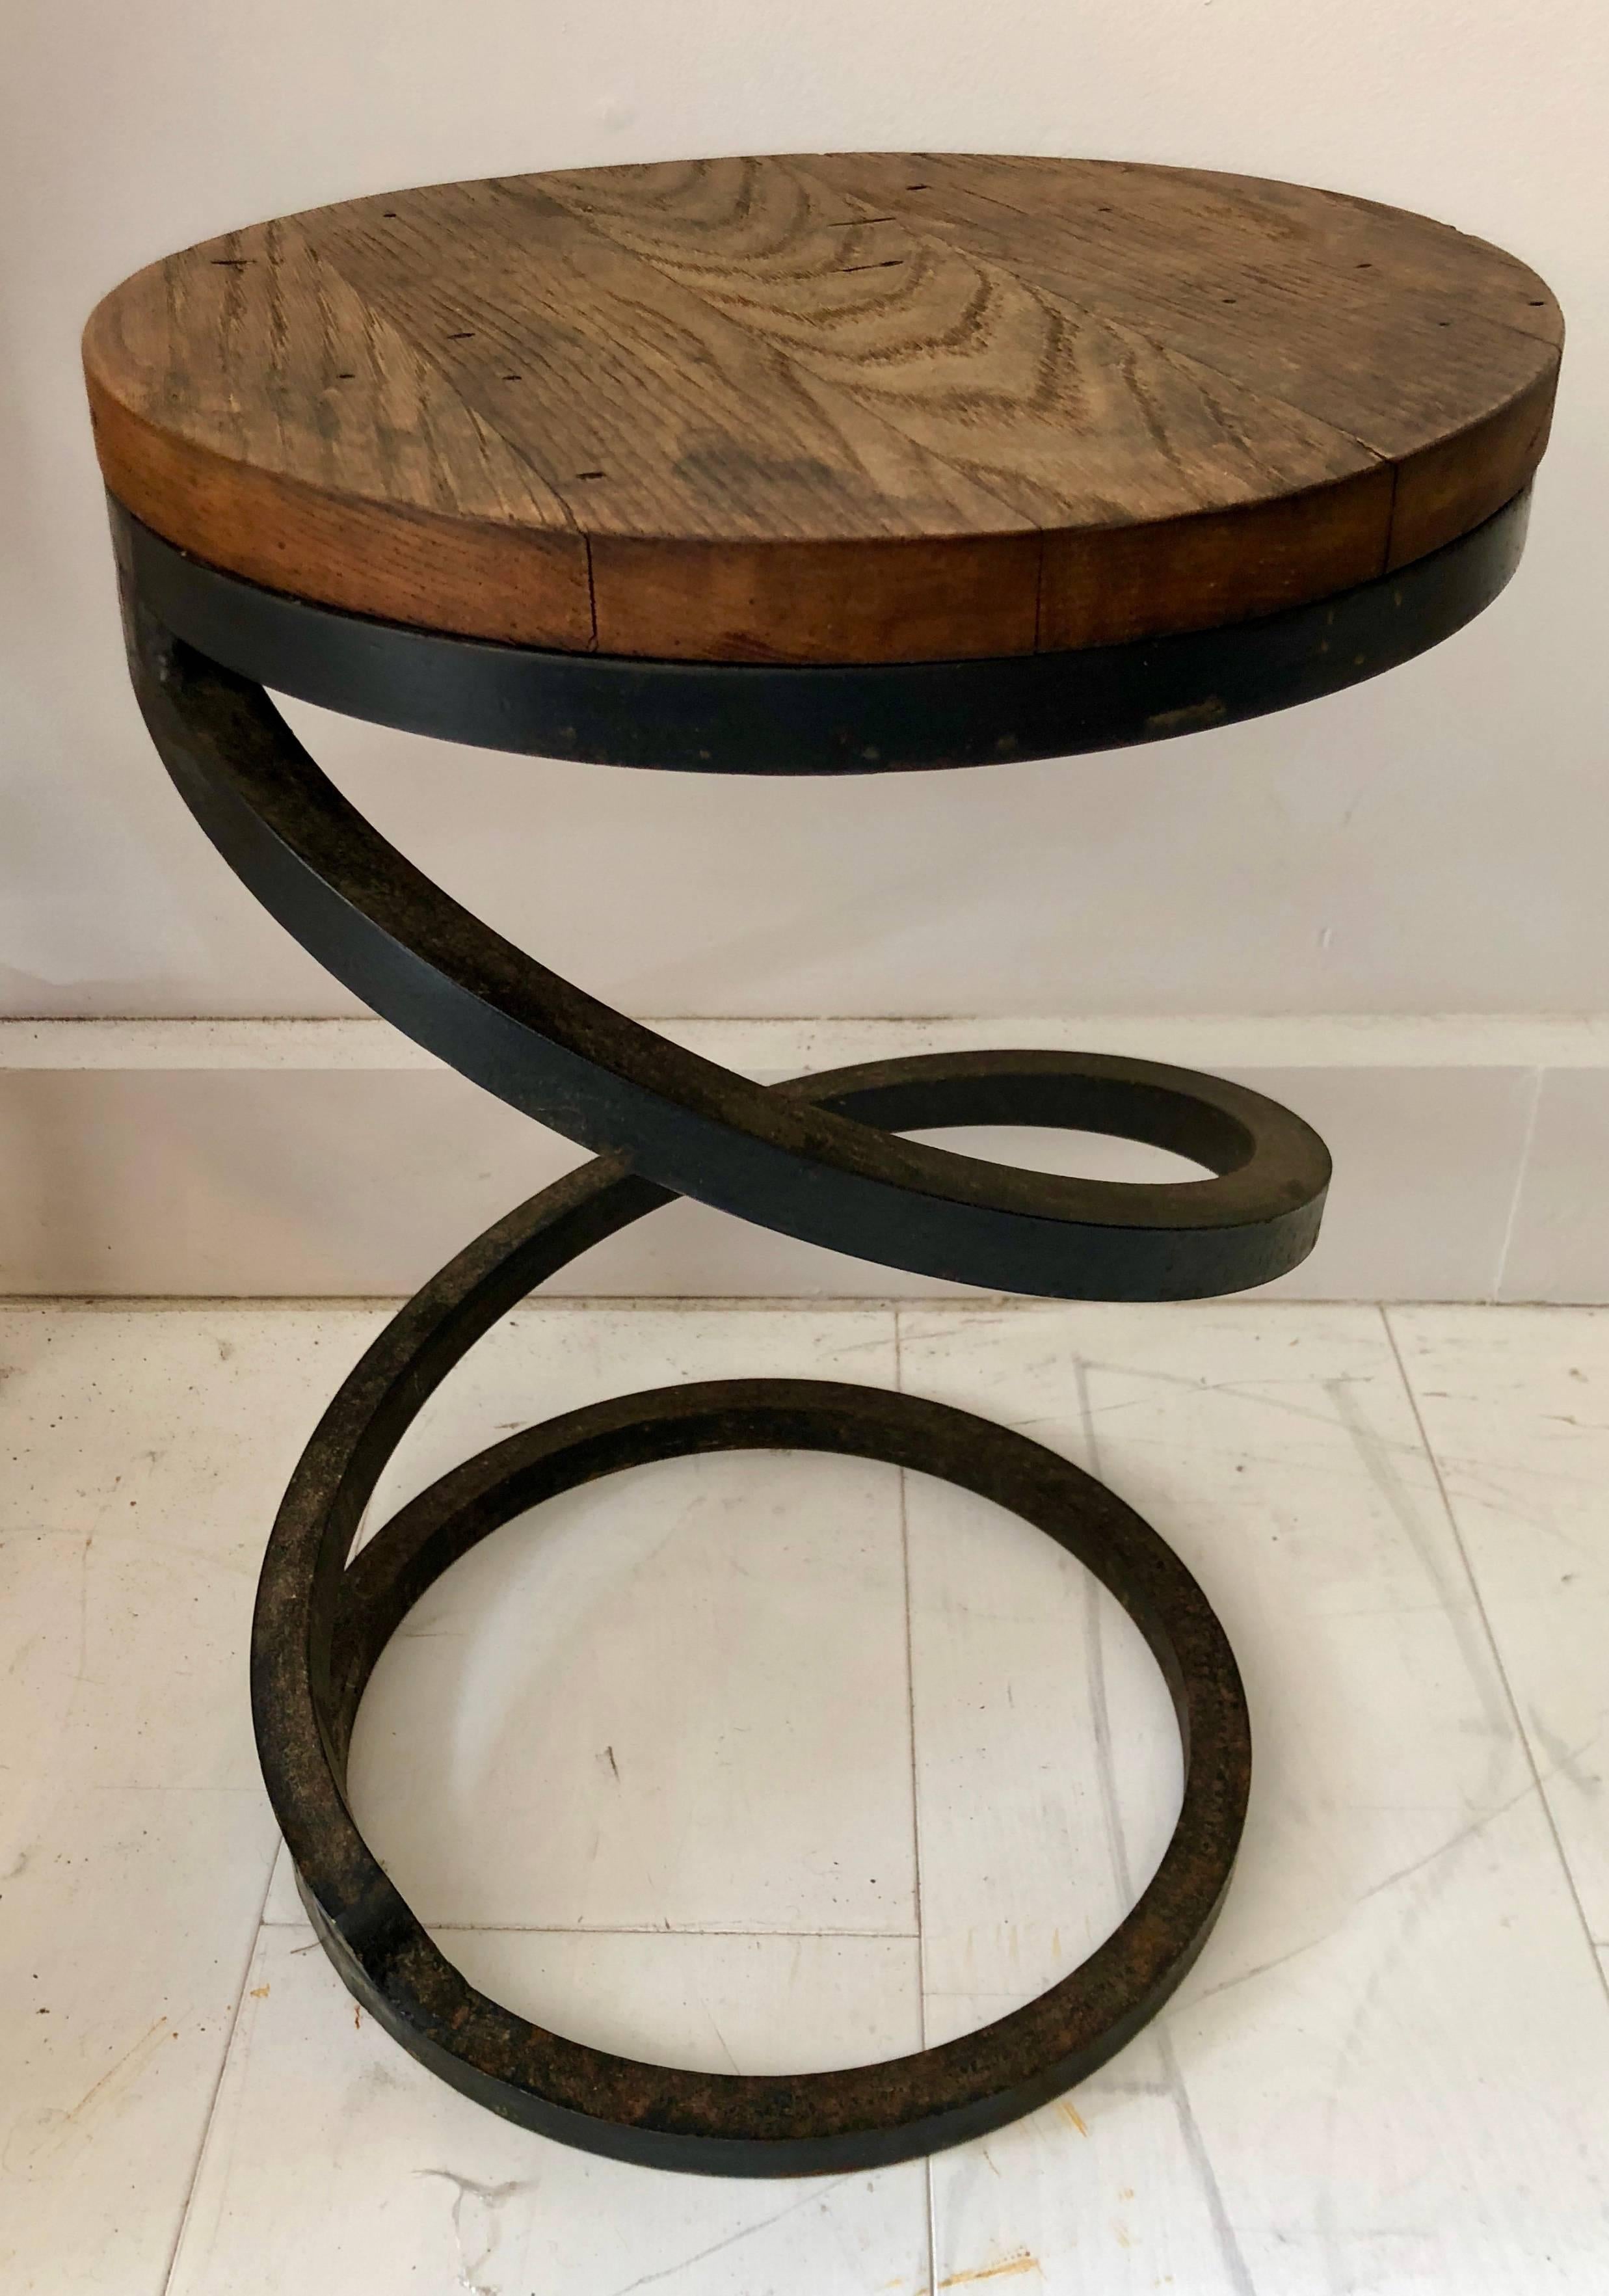 Possibly custom-made, these rustic modern corkscrew-form tables are constructed from heavy solid wrought iron and old repurposed wood tops. All three tables are 12” diameter; heights are 18.75”, 17.5”, and 16.75”. Sold individually.